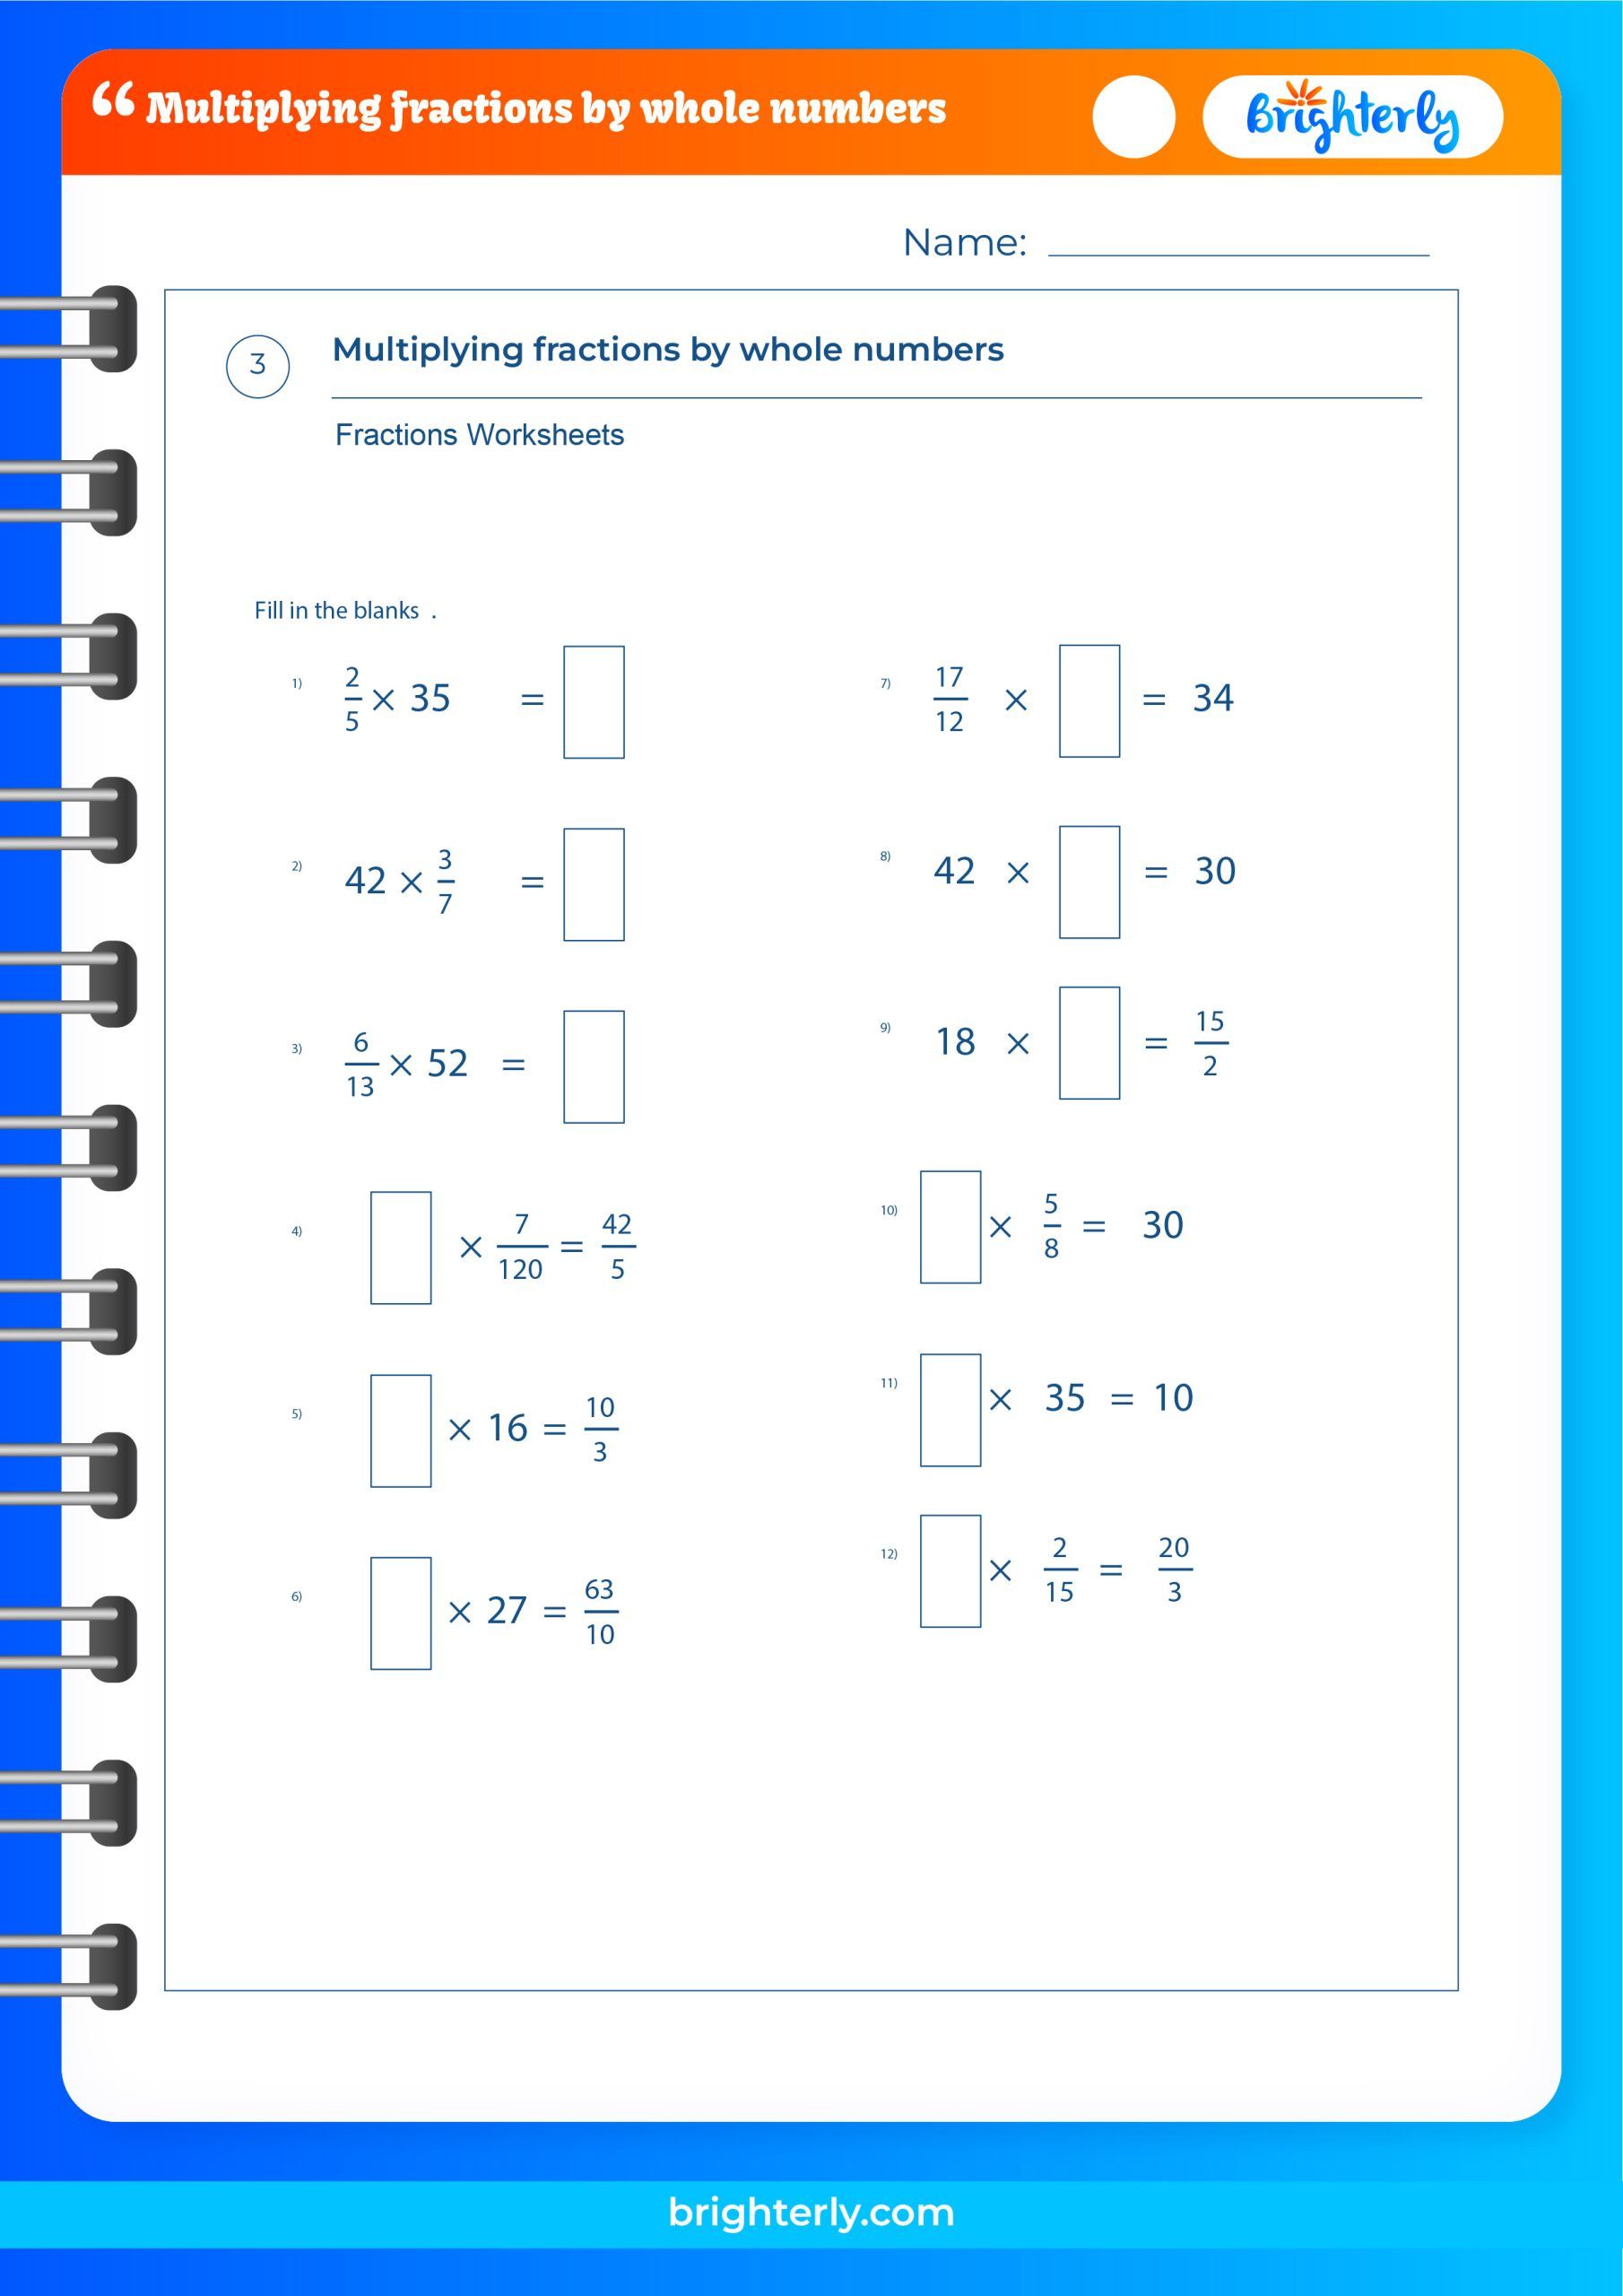 multiplying-fractions-by-whole-numbers-worksheets-pdfs